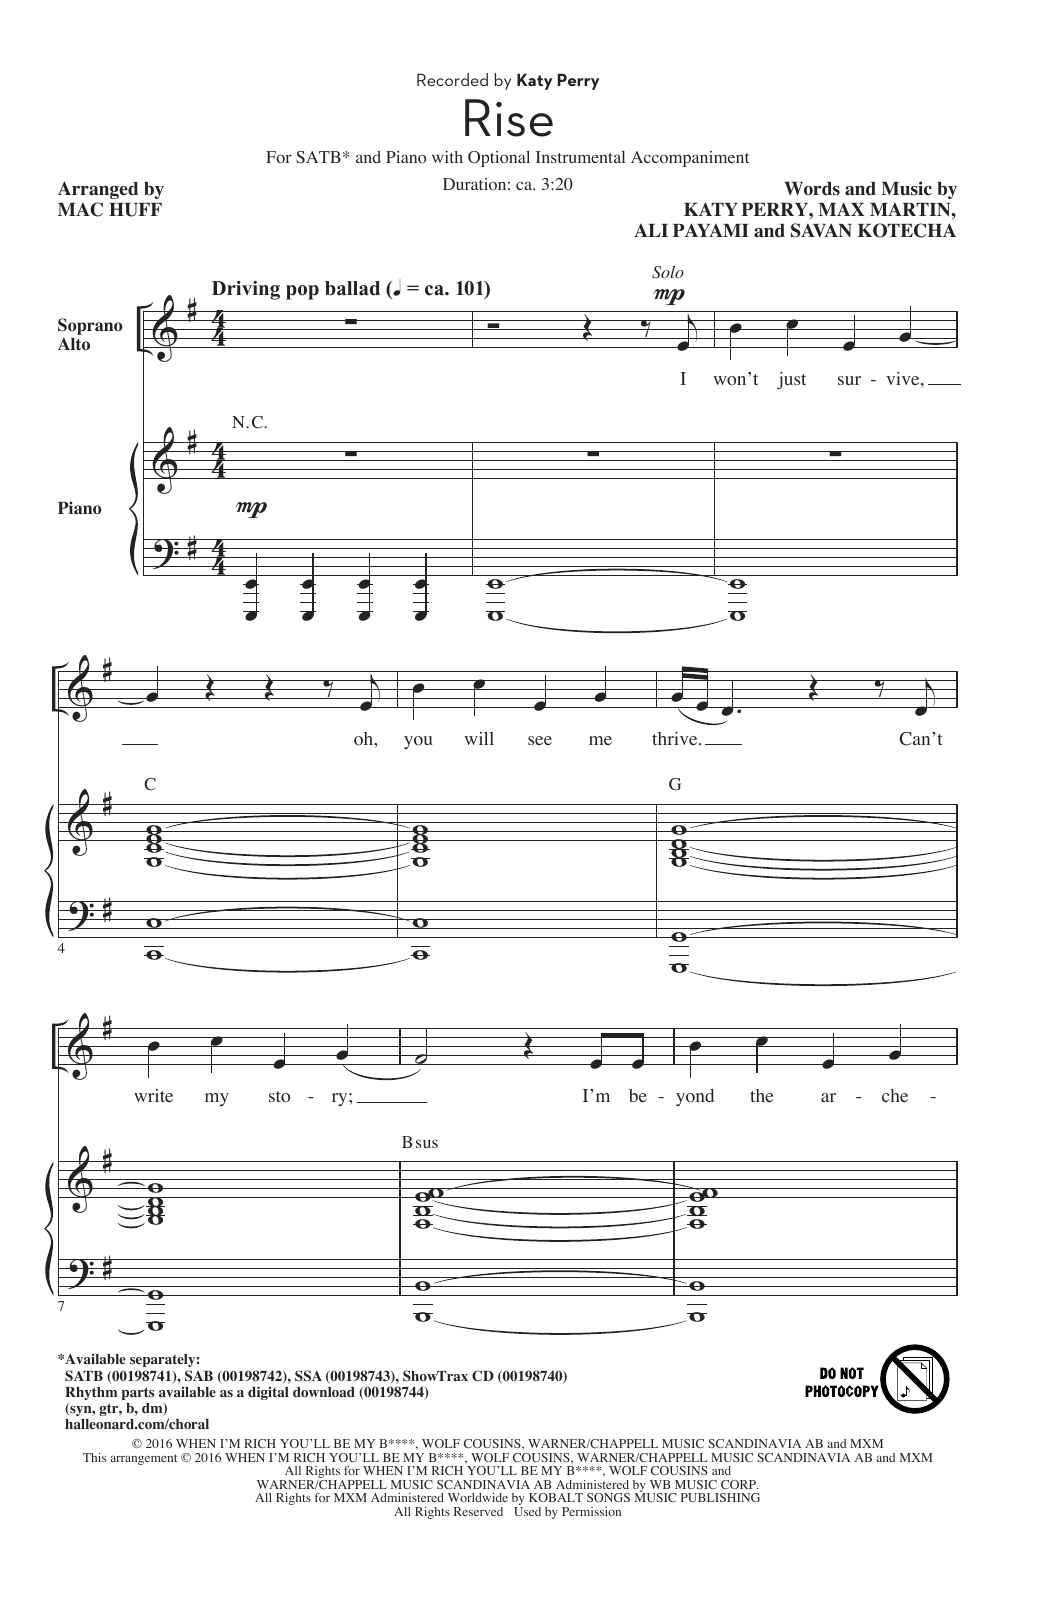 Download Katy Perry Rise (arr. Mac Huff) Sheet Music